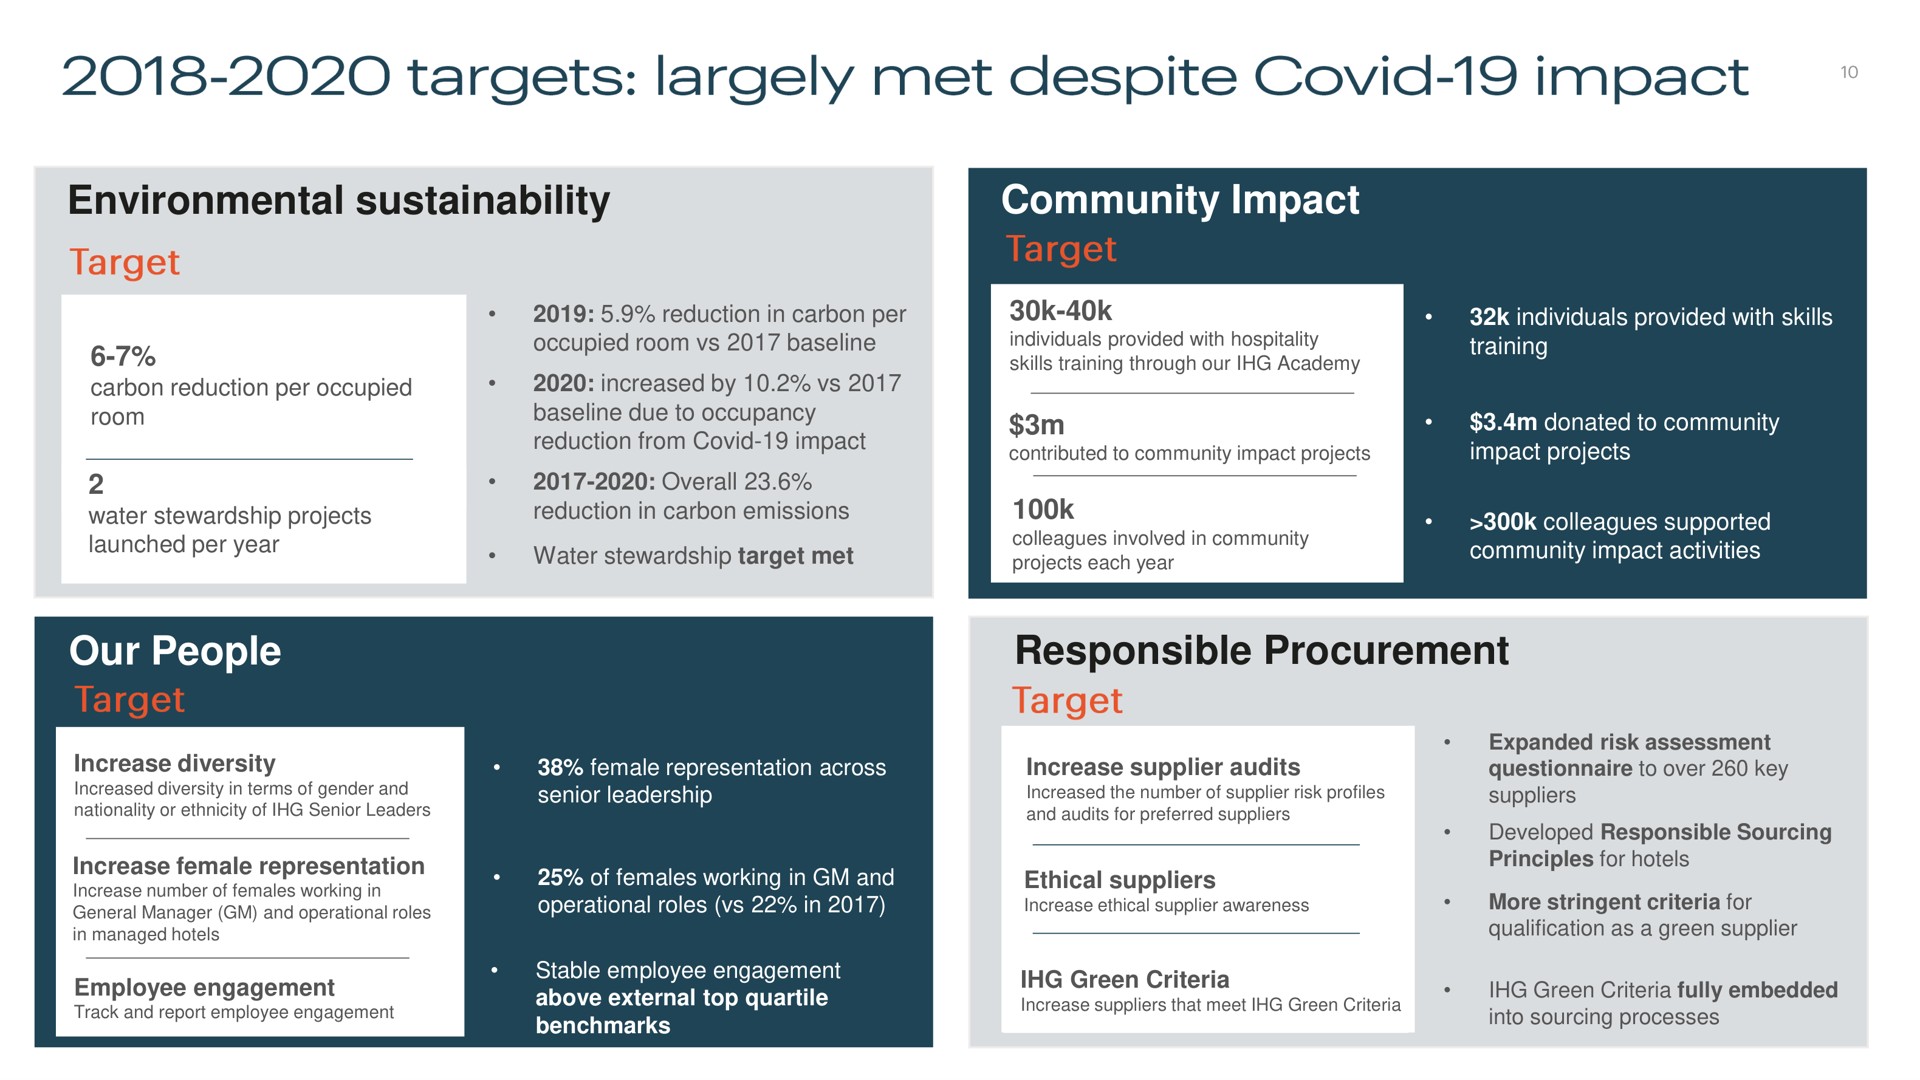 environmental community impact our people responsible procurement targets largely met despite covid | IHG Hotels